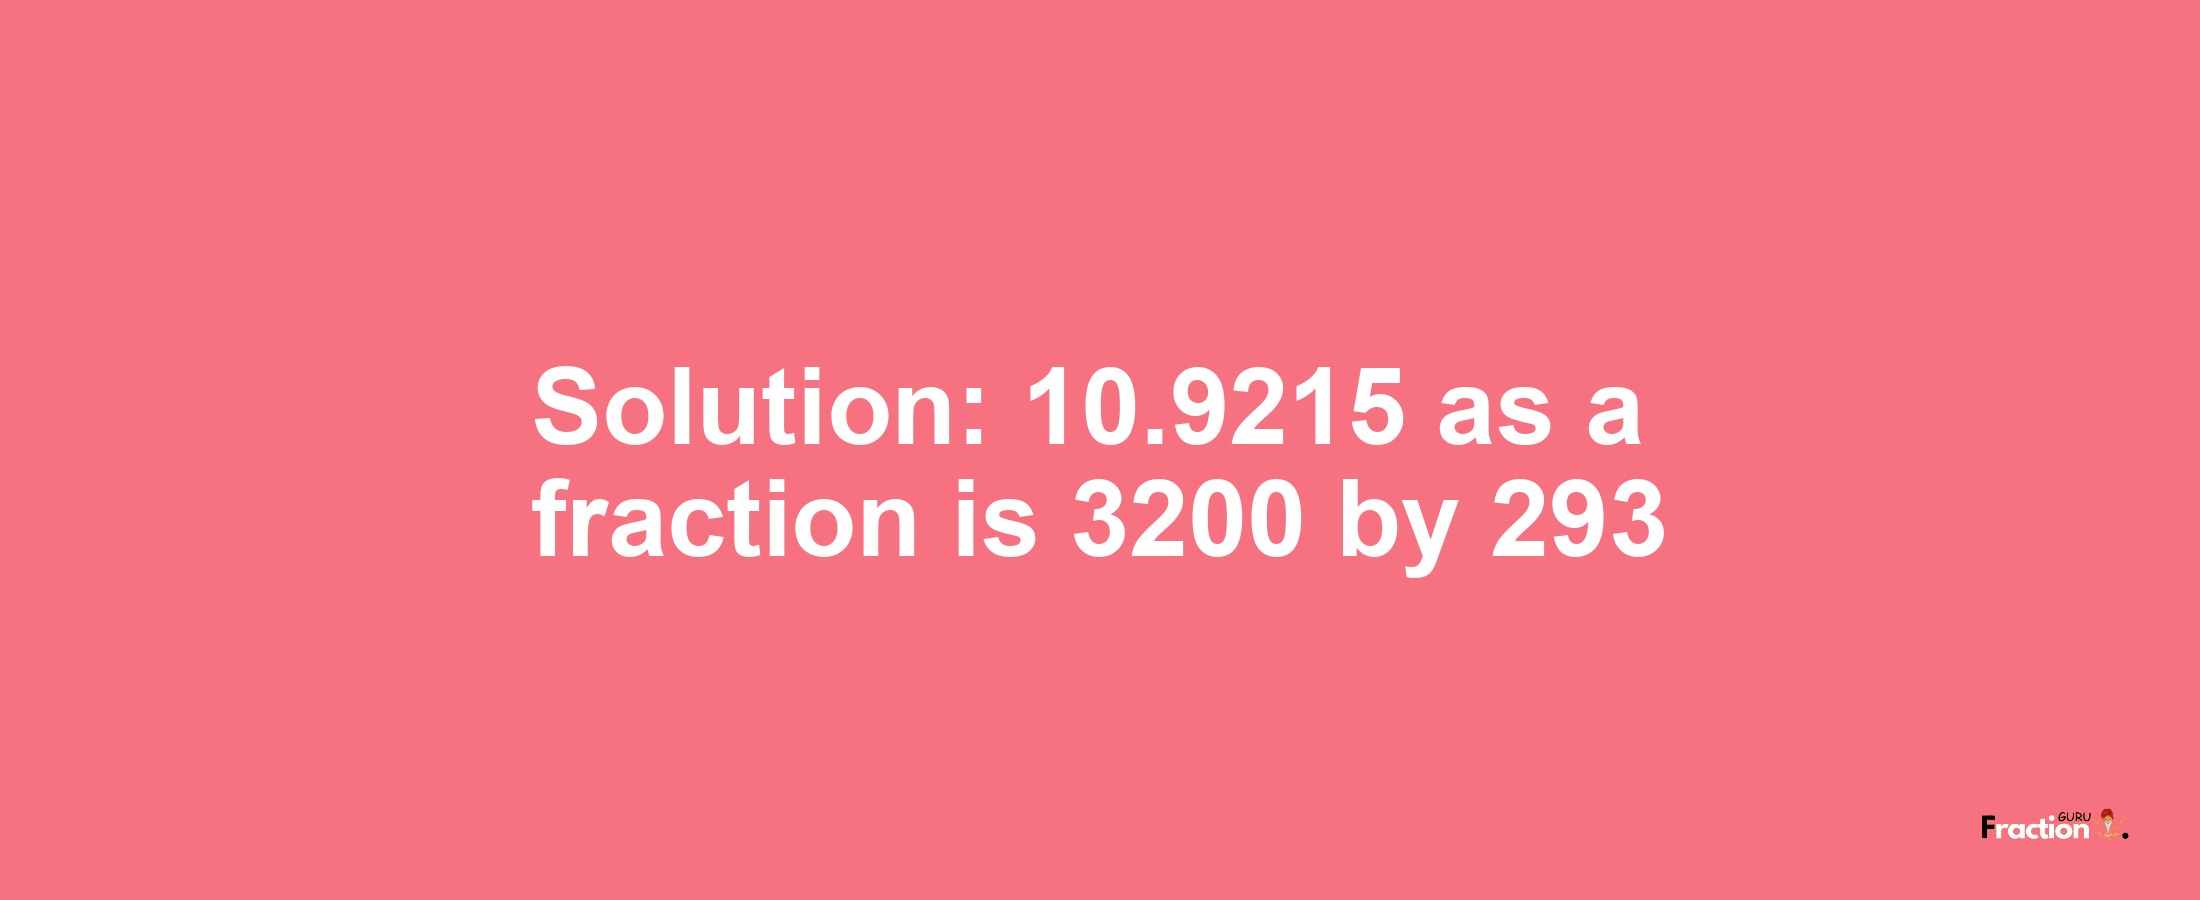 Solution:10.9215 as a fraction is 3200/293